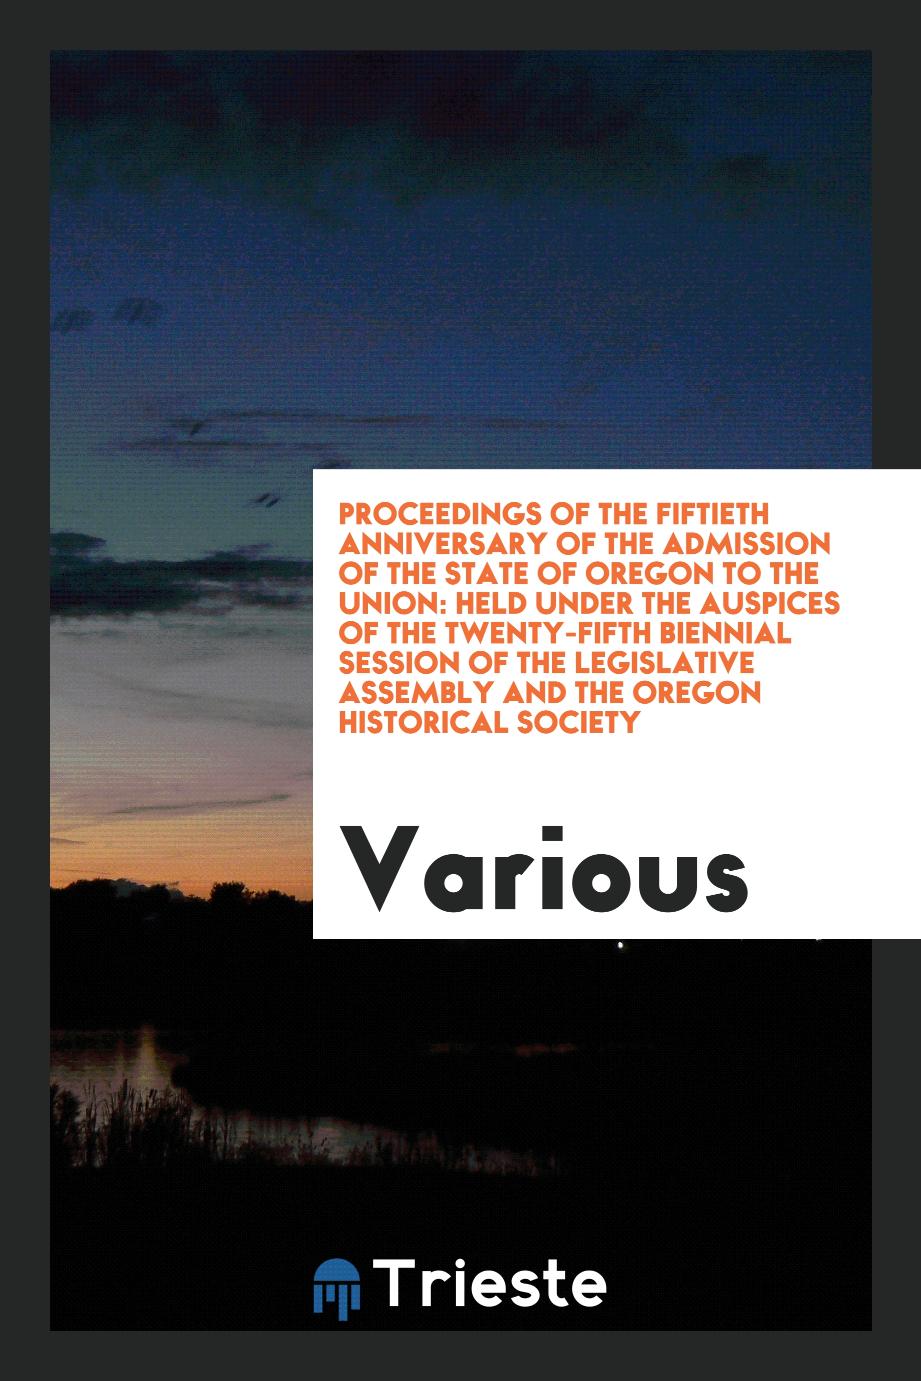 Proceedings of the fiftieth anniversary of the admission of the state of Oregon to the Union: held under the auspices of the twenty-fifth biennial session of the Legislative Assembly and the Oregon Historical Society